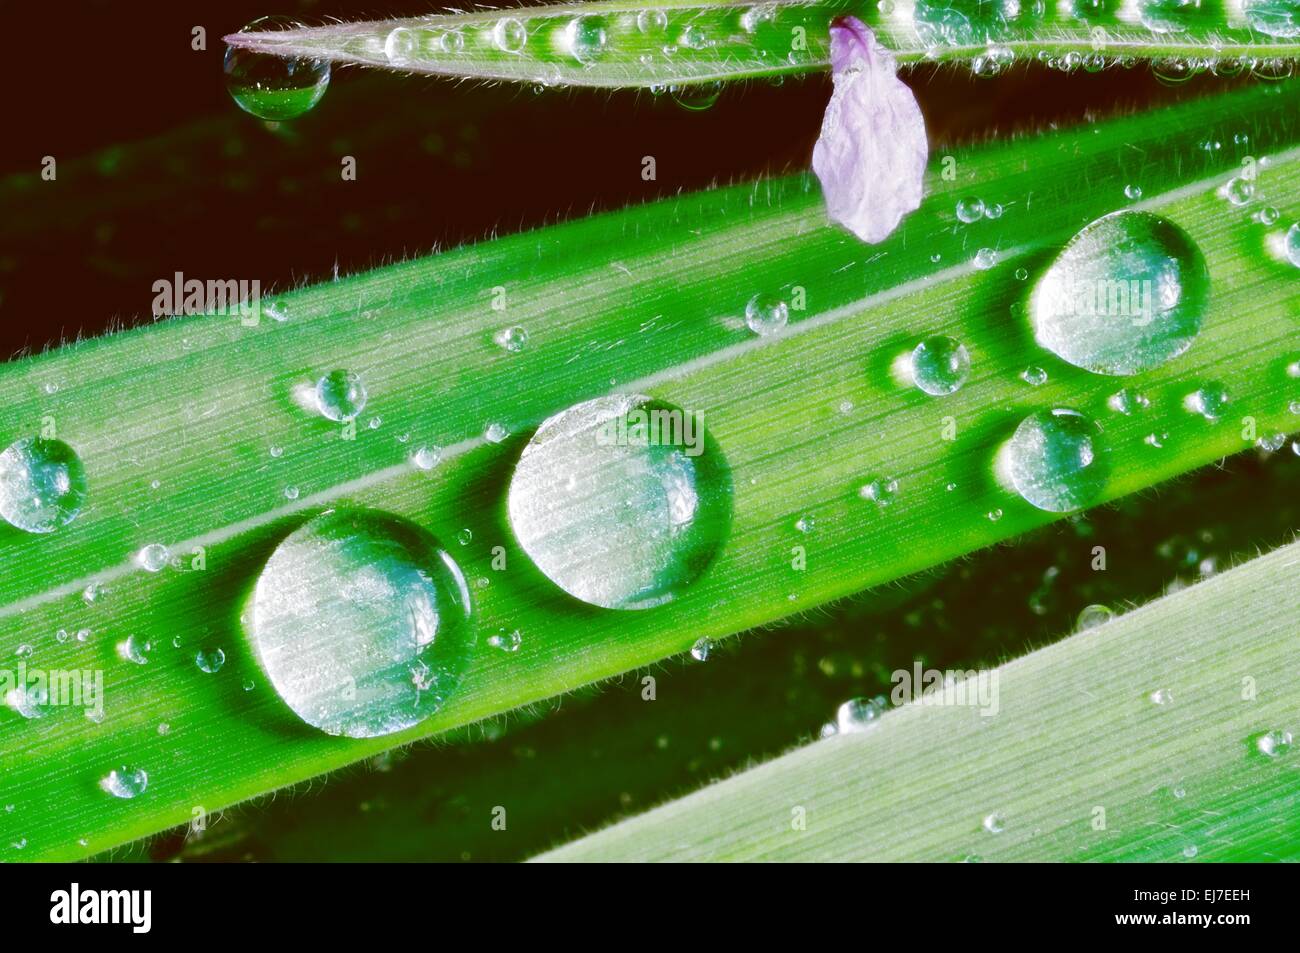 Beads on the blade of grass Stock Photo